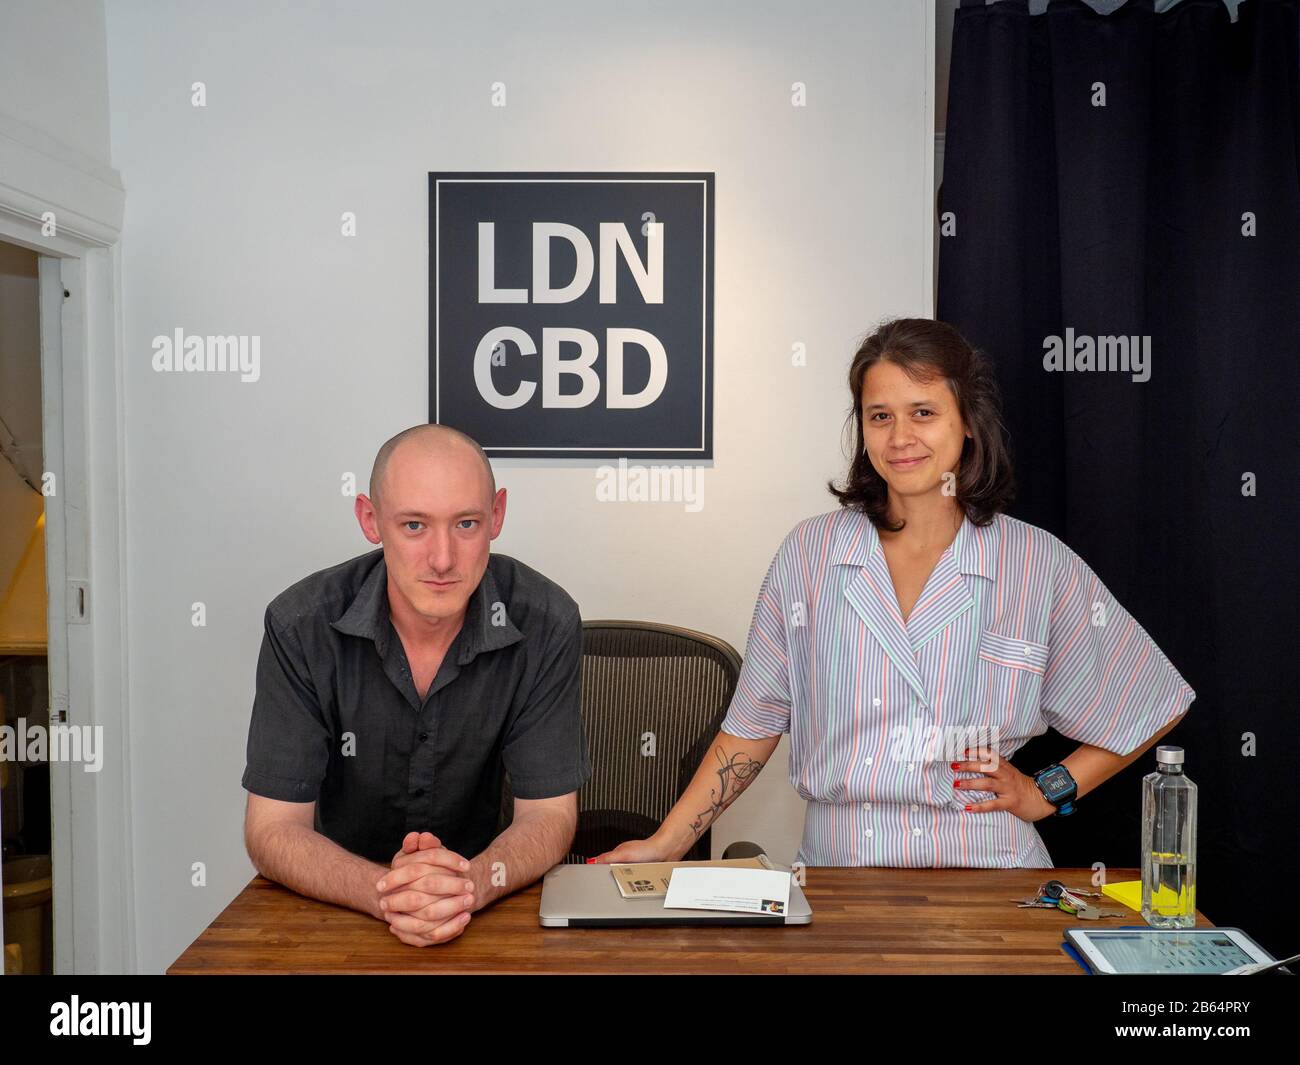 Marcus Lions and Jacqueline Chan working at the LDN CBD boutique in Camden Town. Stock Photo